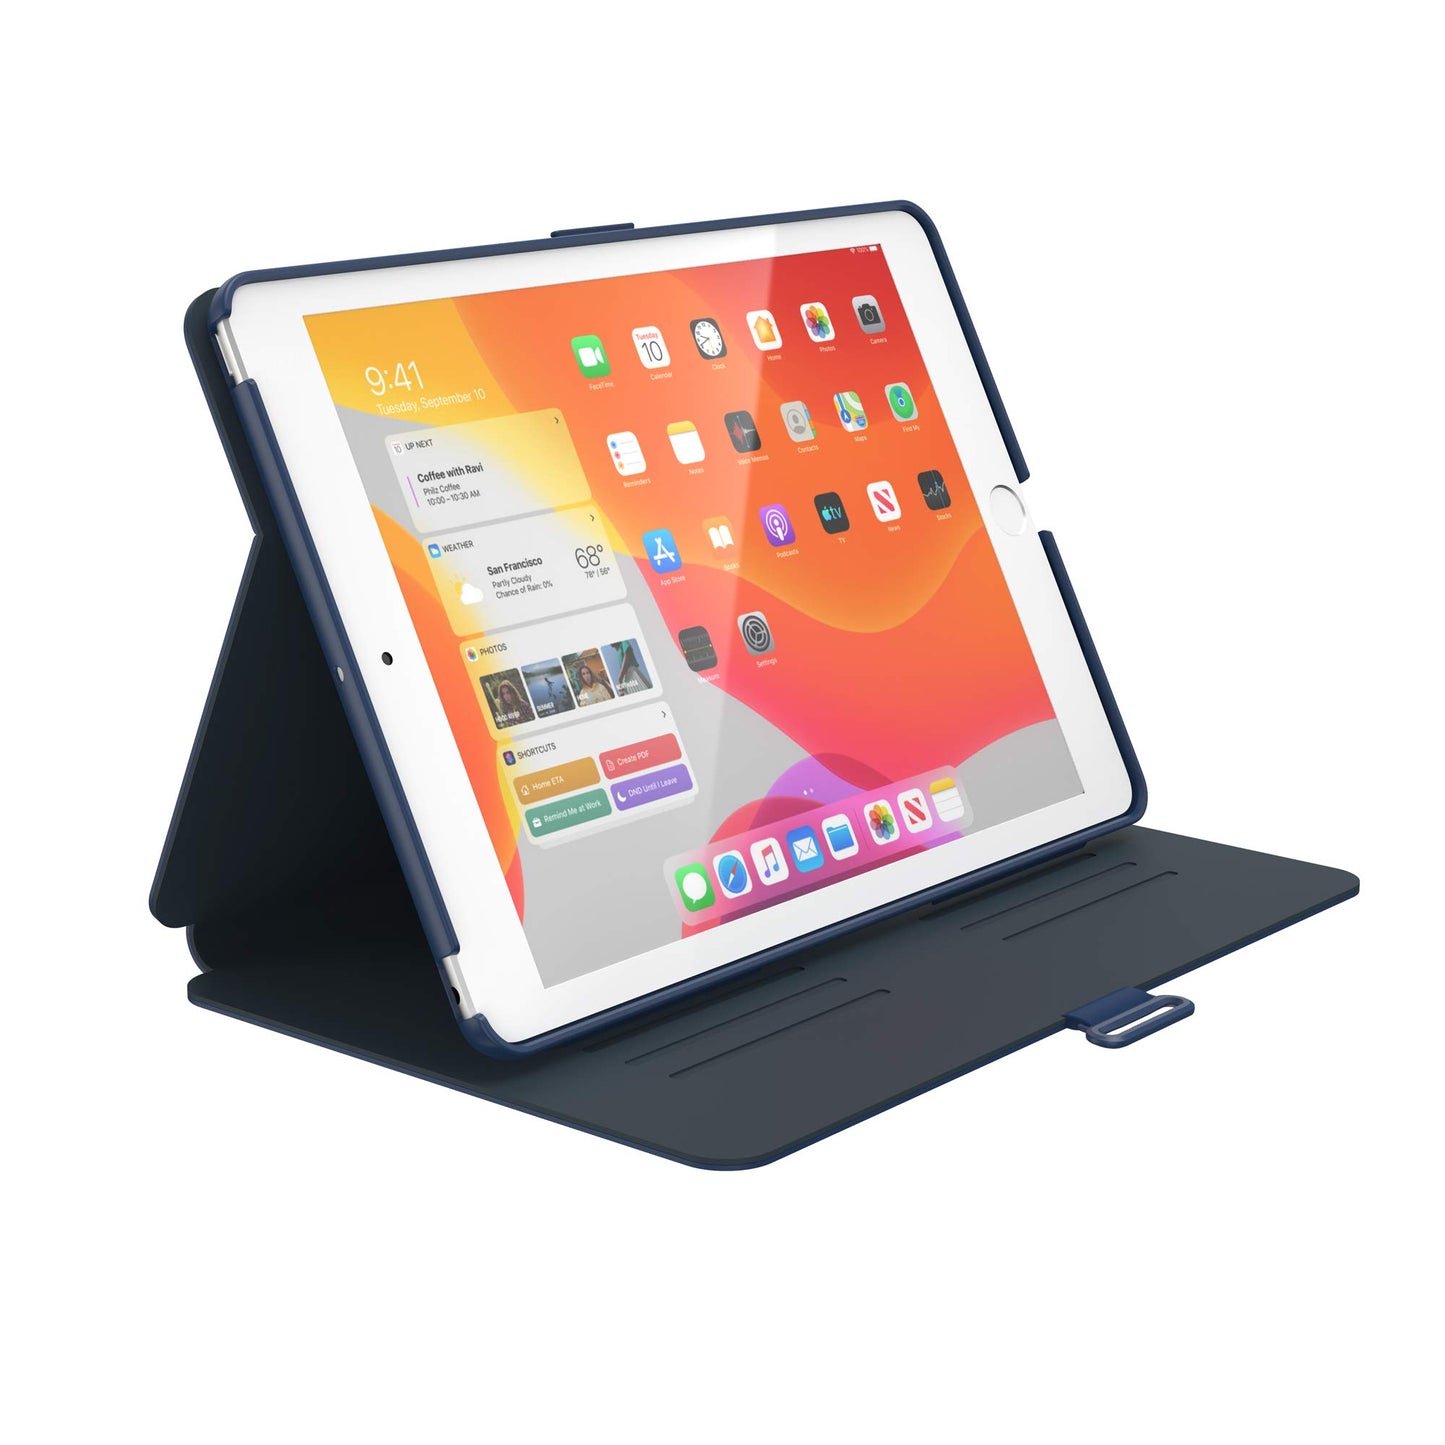 Speck iPad 10.2 Inch Case 2019 - Slim Stand, Hard Back Fits iPad 2020 & 2019 - Multi-Range Stand with Protective, Locking Smart Cover Case for ipad - Costal Blue, Charcoal Grey BalanceFolio